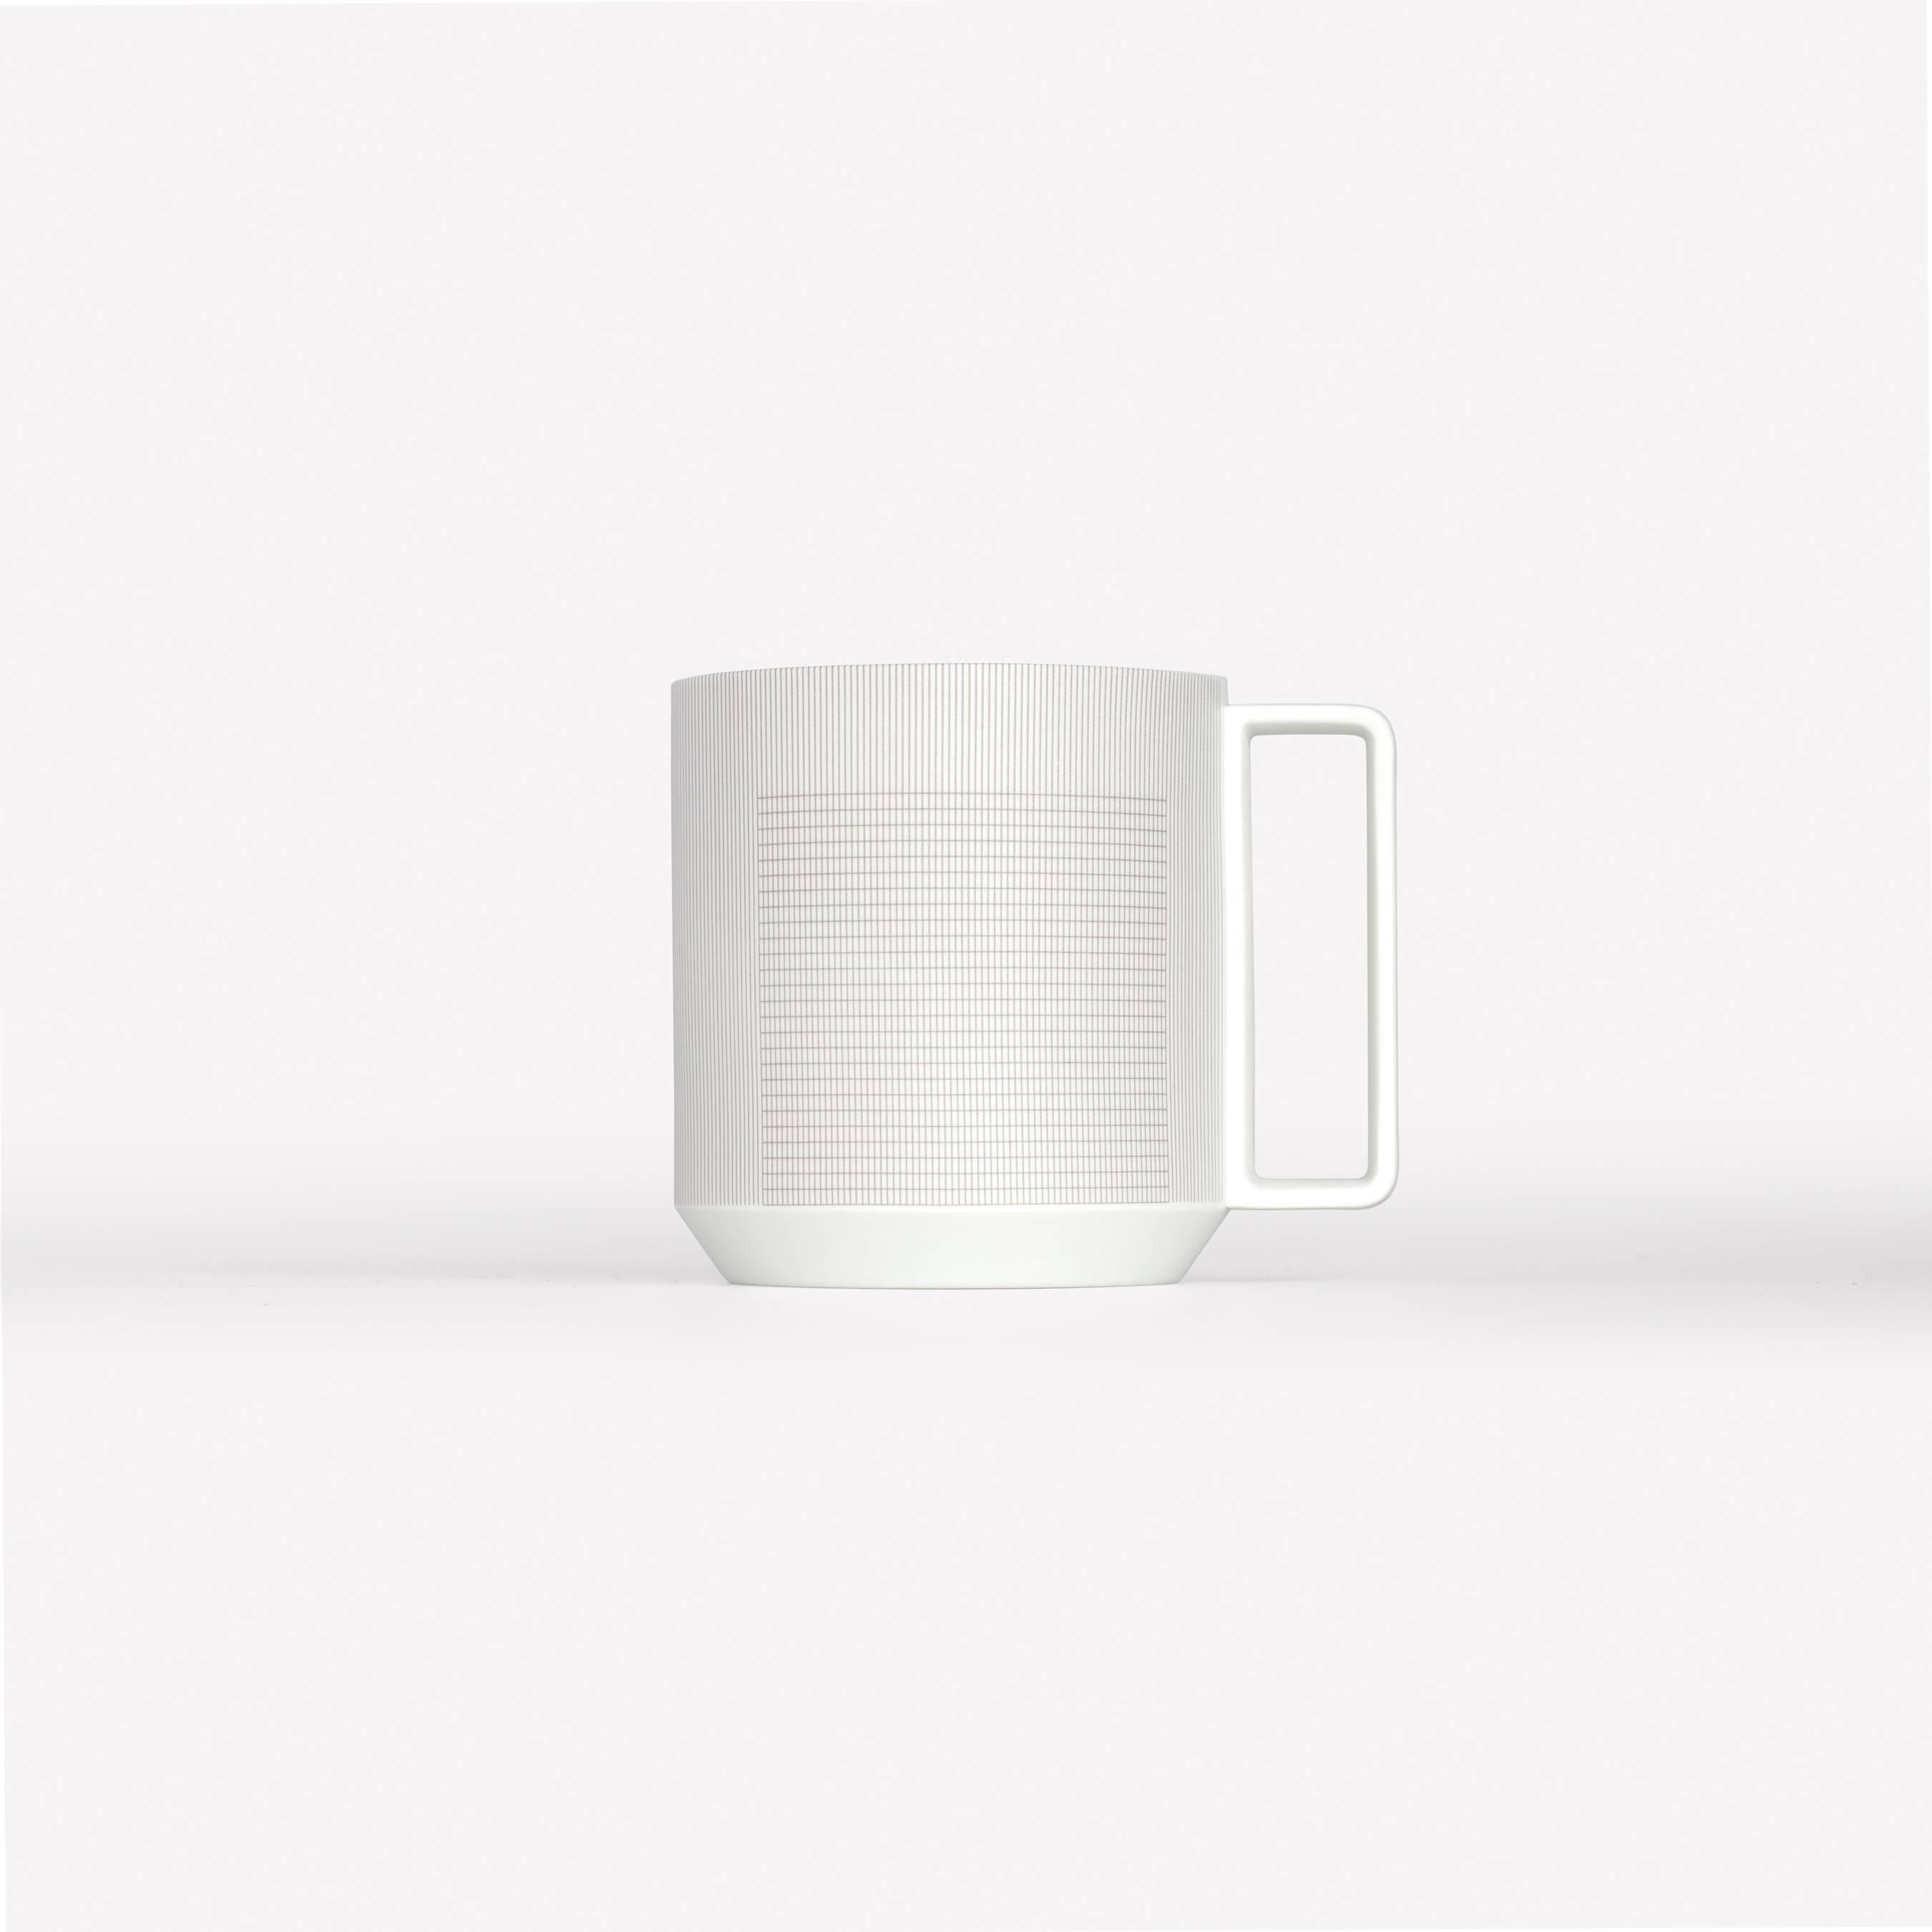 Pattern Porcelain Mug by Scholten & Baijings
003 Zinc

Porcelain with Grid textile graphic. Matte exterior with gloss interior. Made in Japan by 1616 / arita Japan. Dishwasher safe.

Scholten & Baijings for Maharam is a collection of home goods and